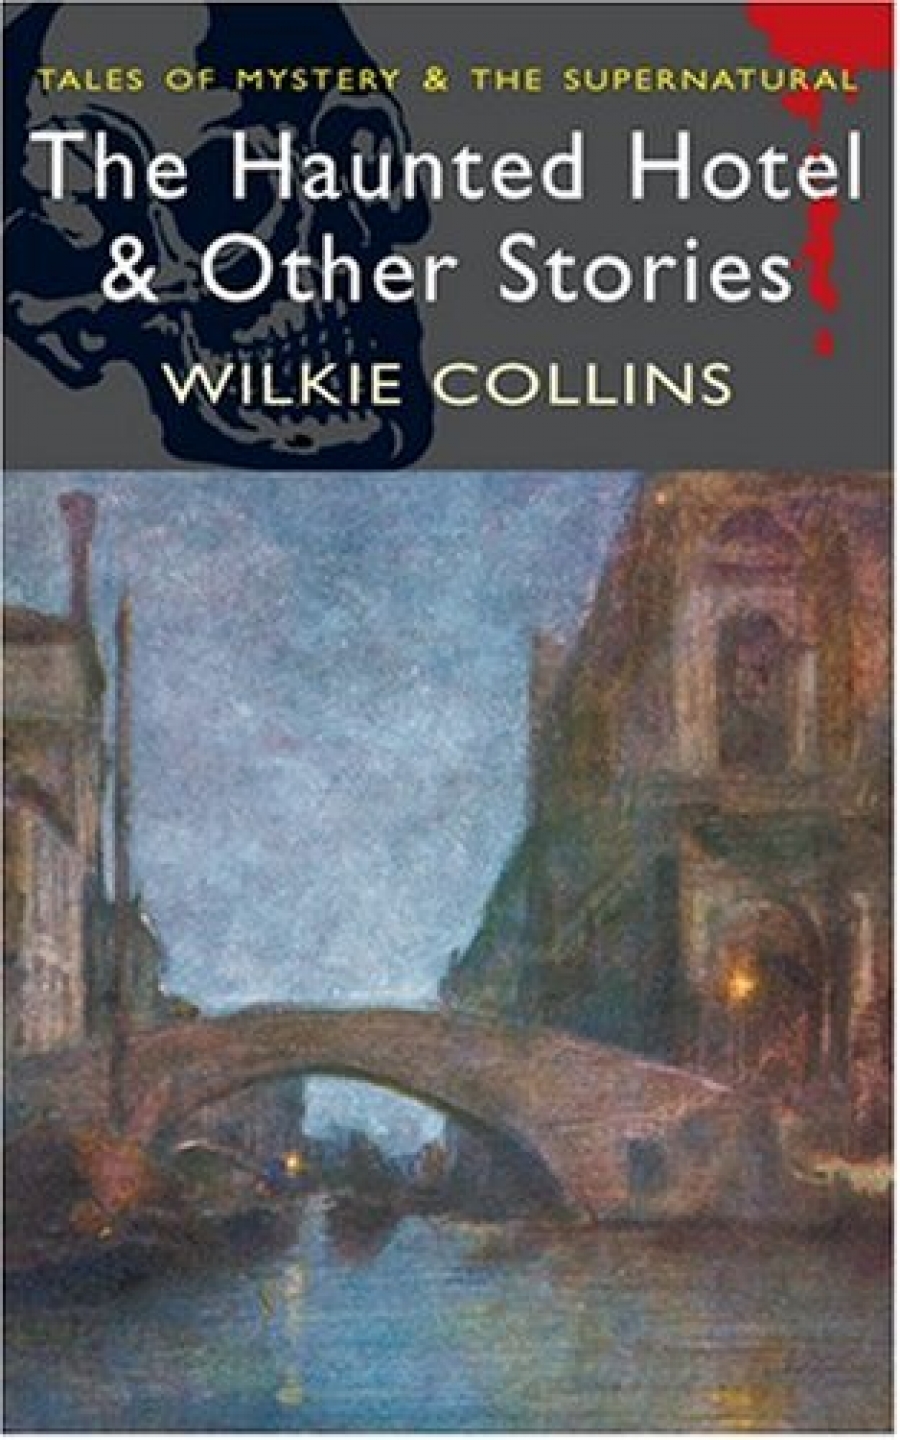 W., Collins Haunted Hotel & Other Strange Stories 